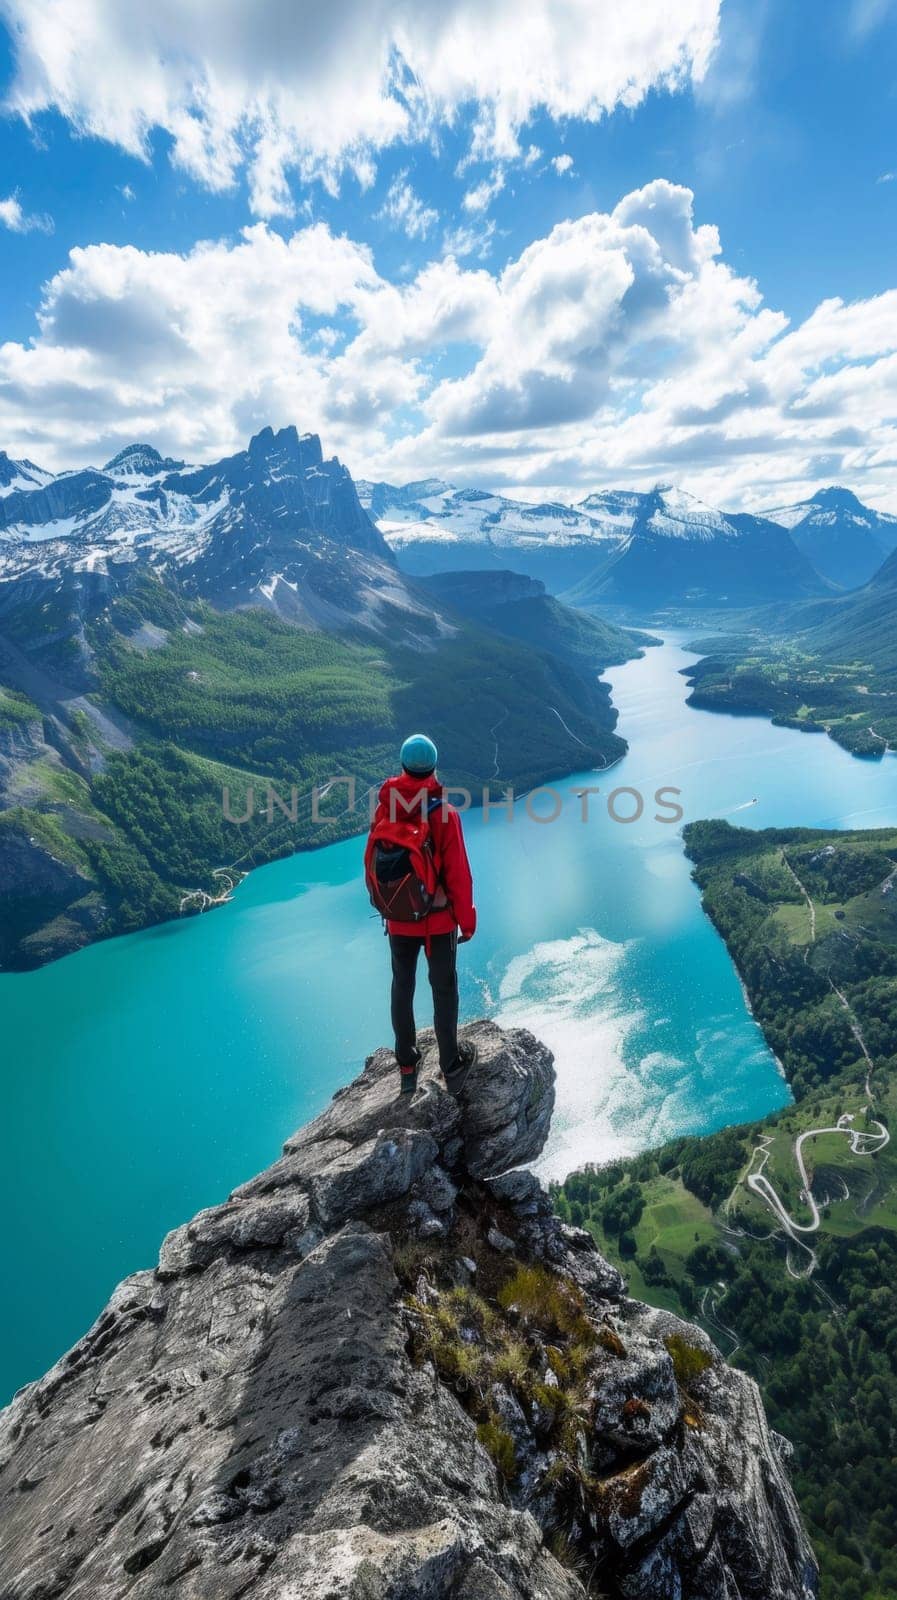 A man standing on top of a cliff overlooking water and mountains